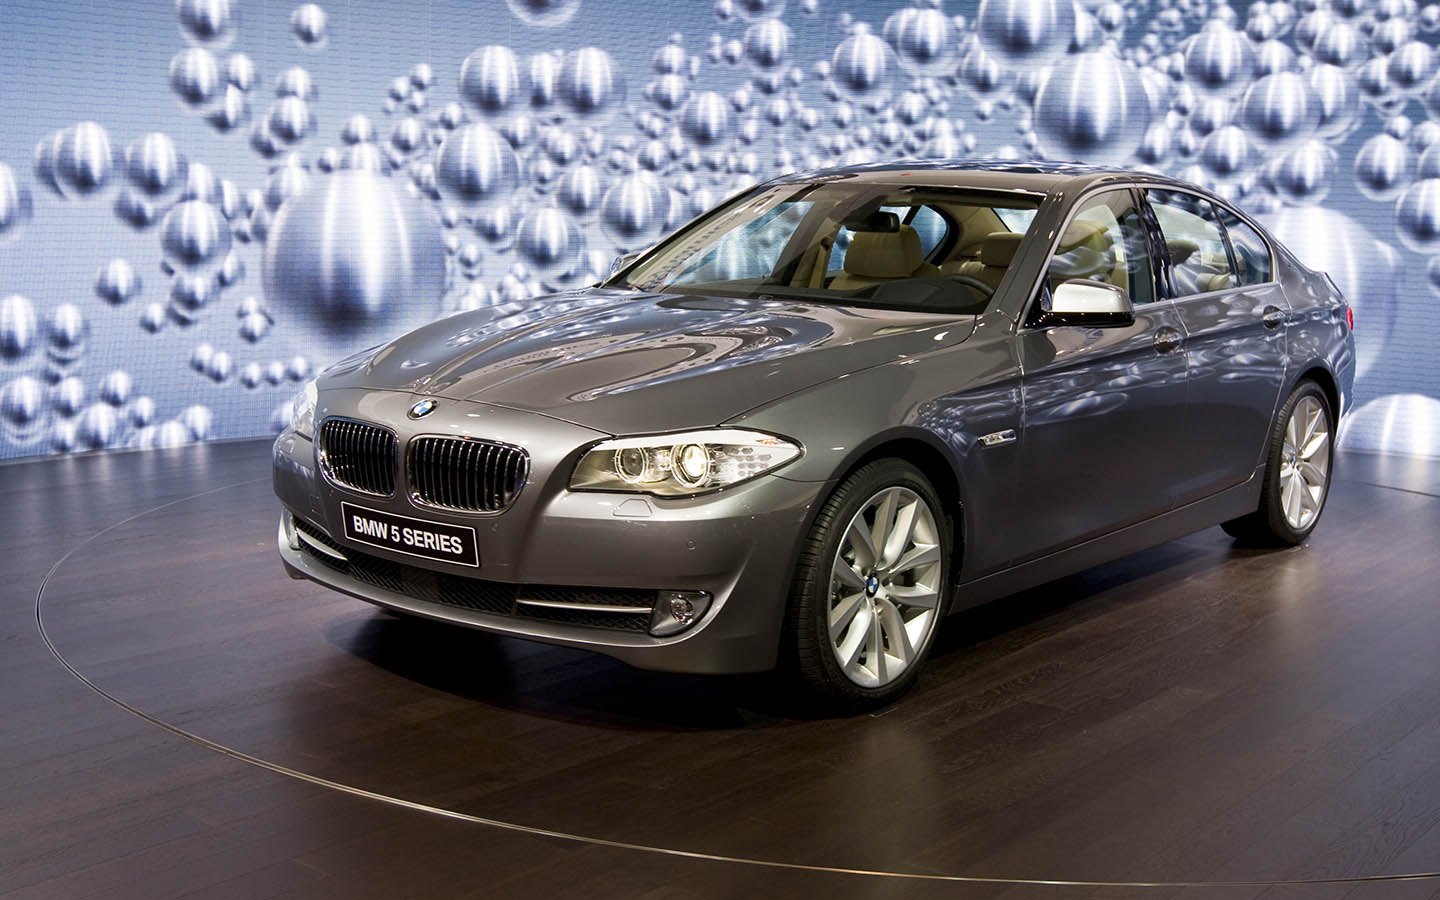 the BMW 5-Series remains a highly popular sedan